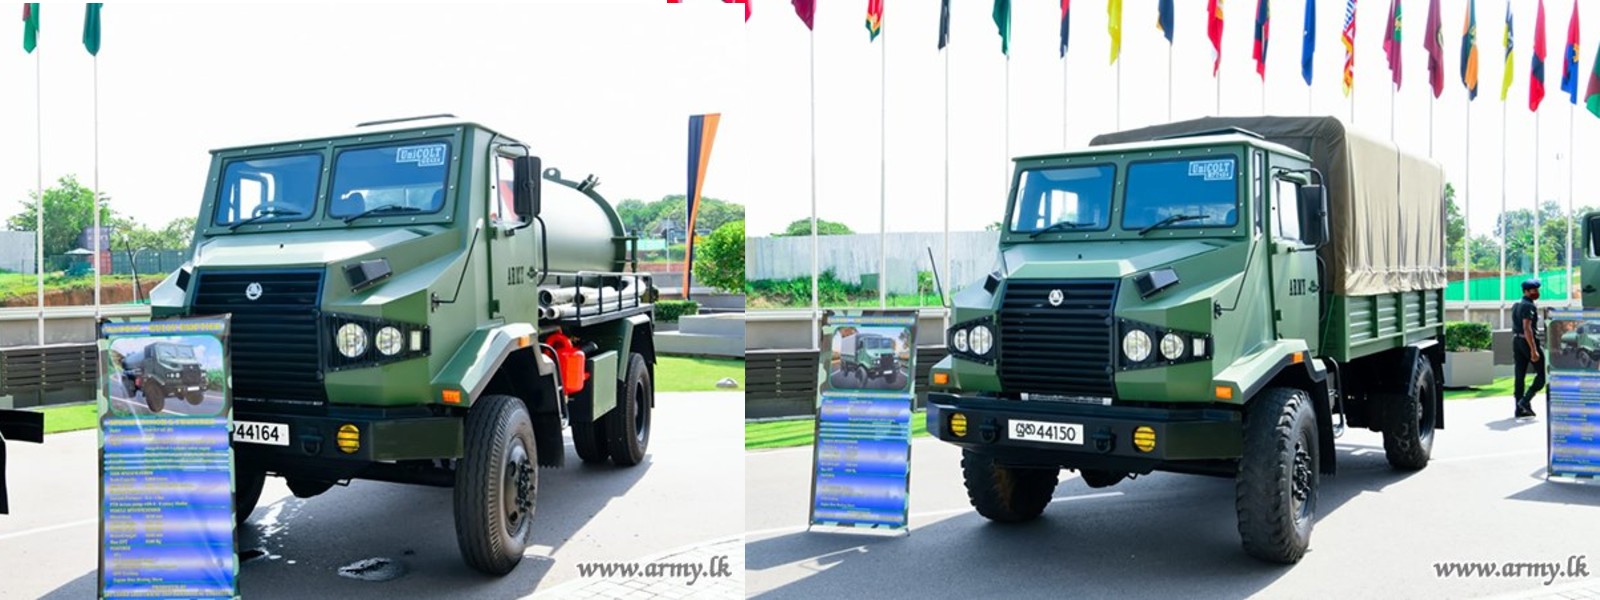 UniCOLT Vehicles manufactured locally by Army